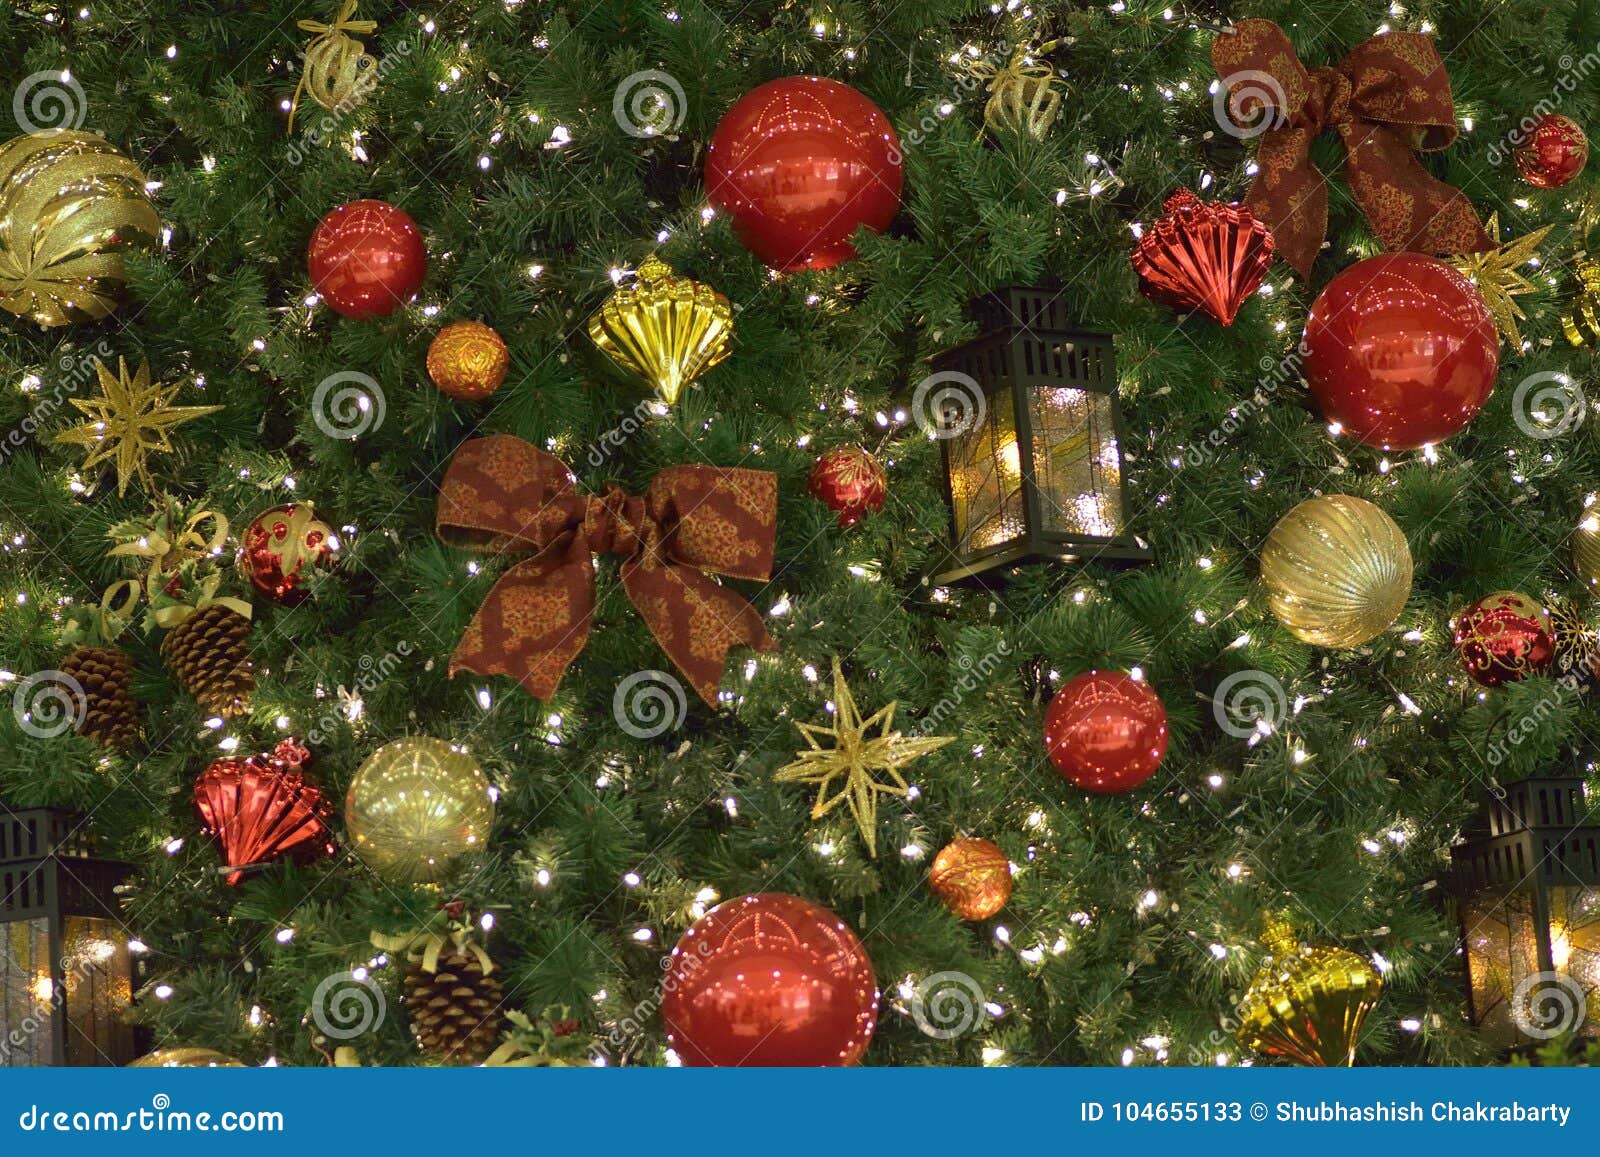 Background Texture of Christmas Tree Decorations Stock Image - Image of ...